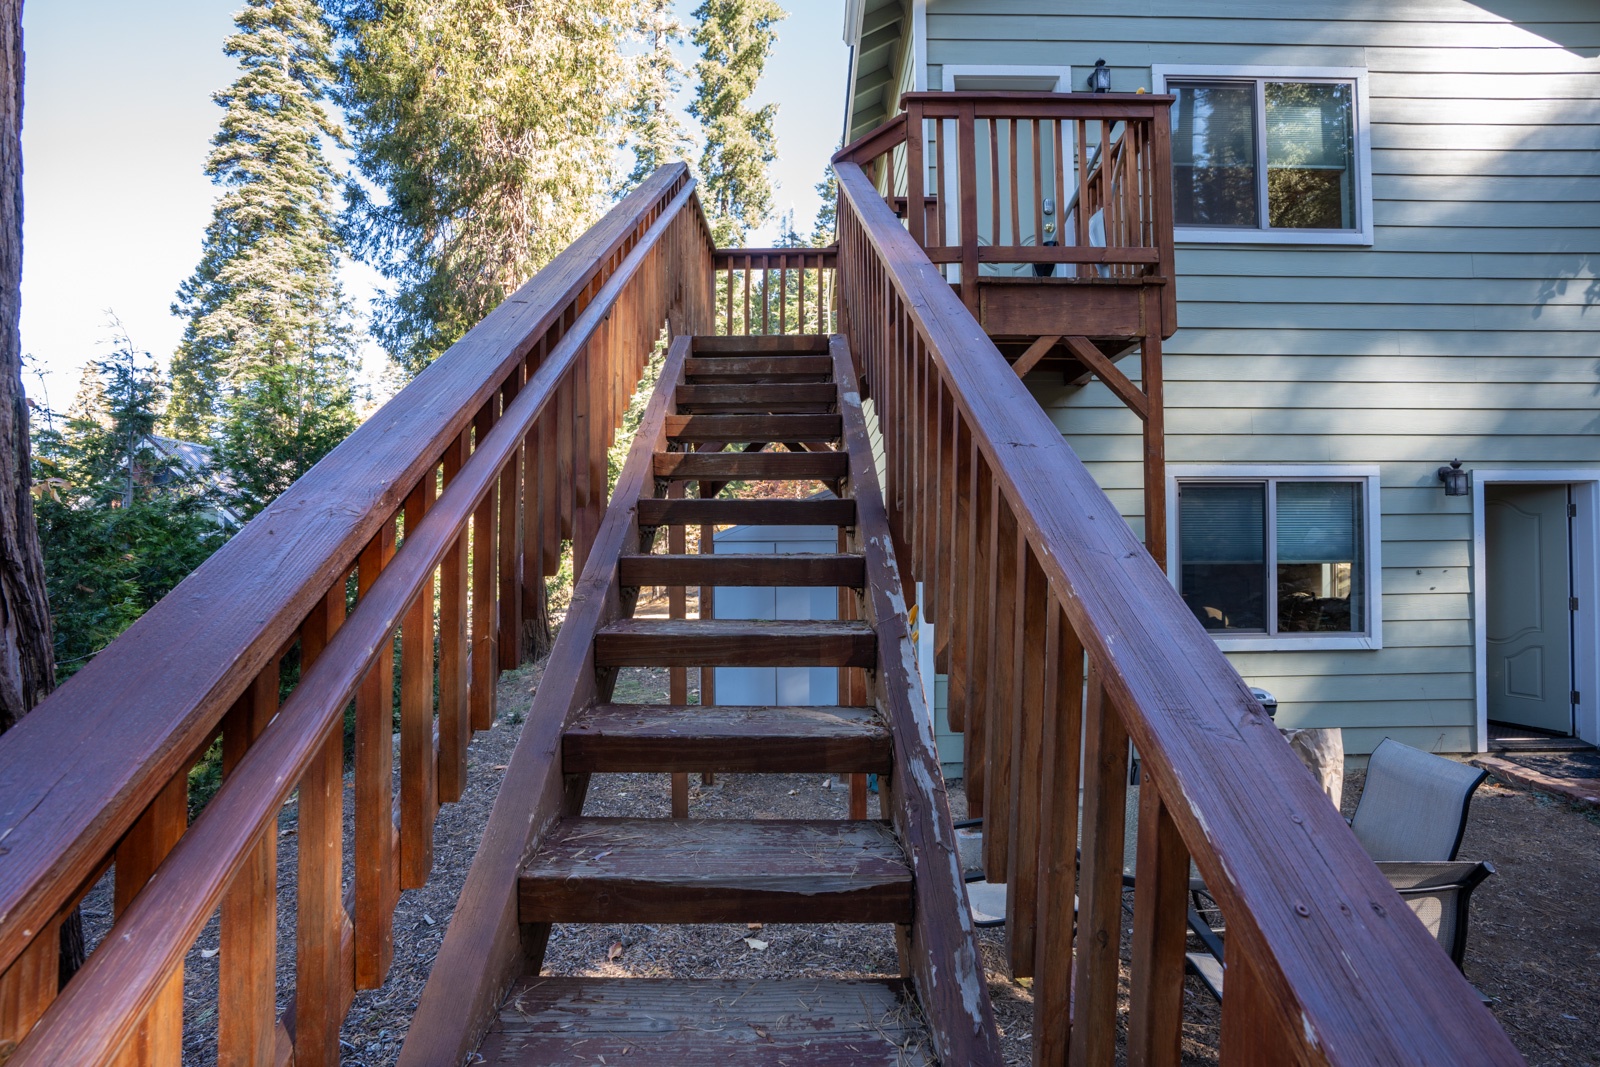 Conquer just one more staircase to reach your upper-level retreat!